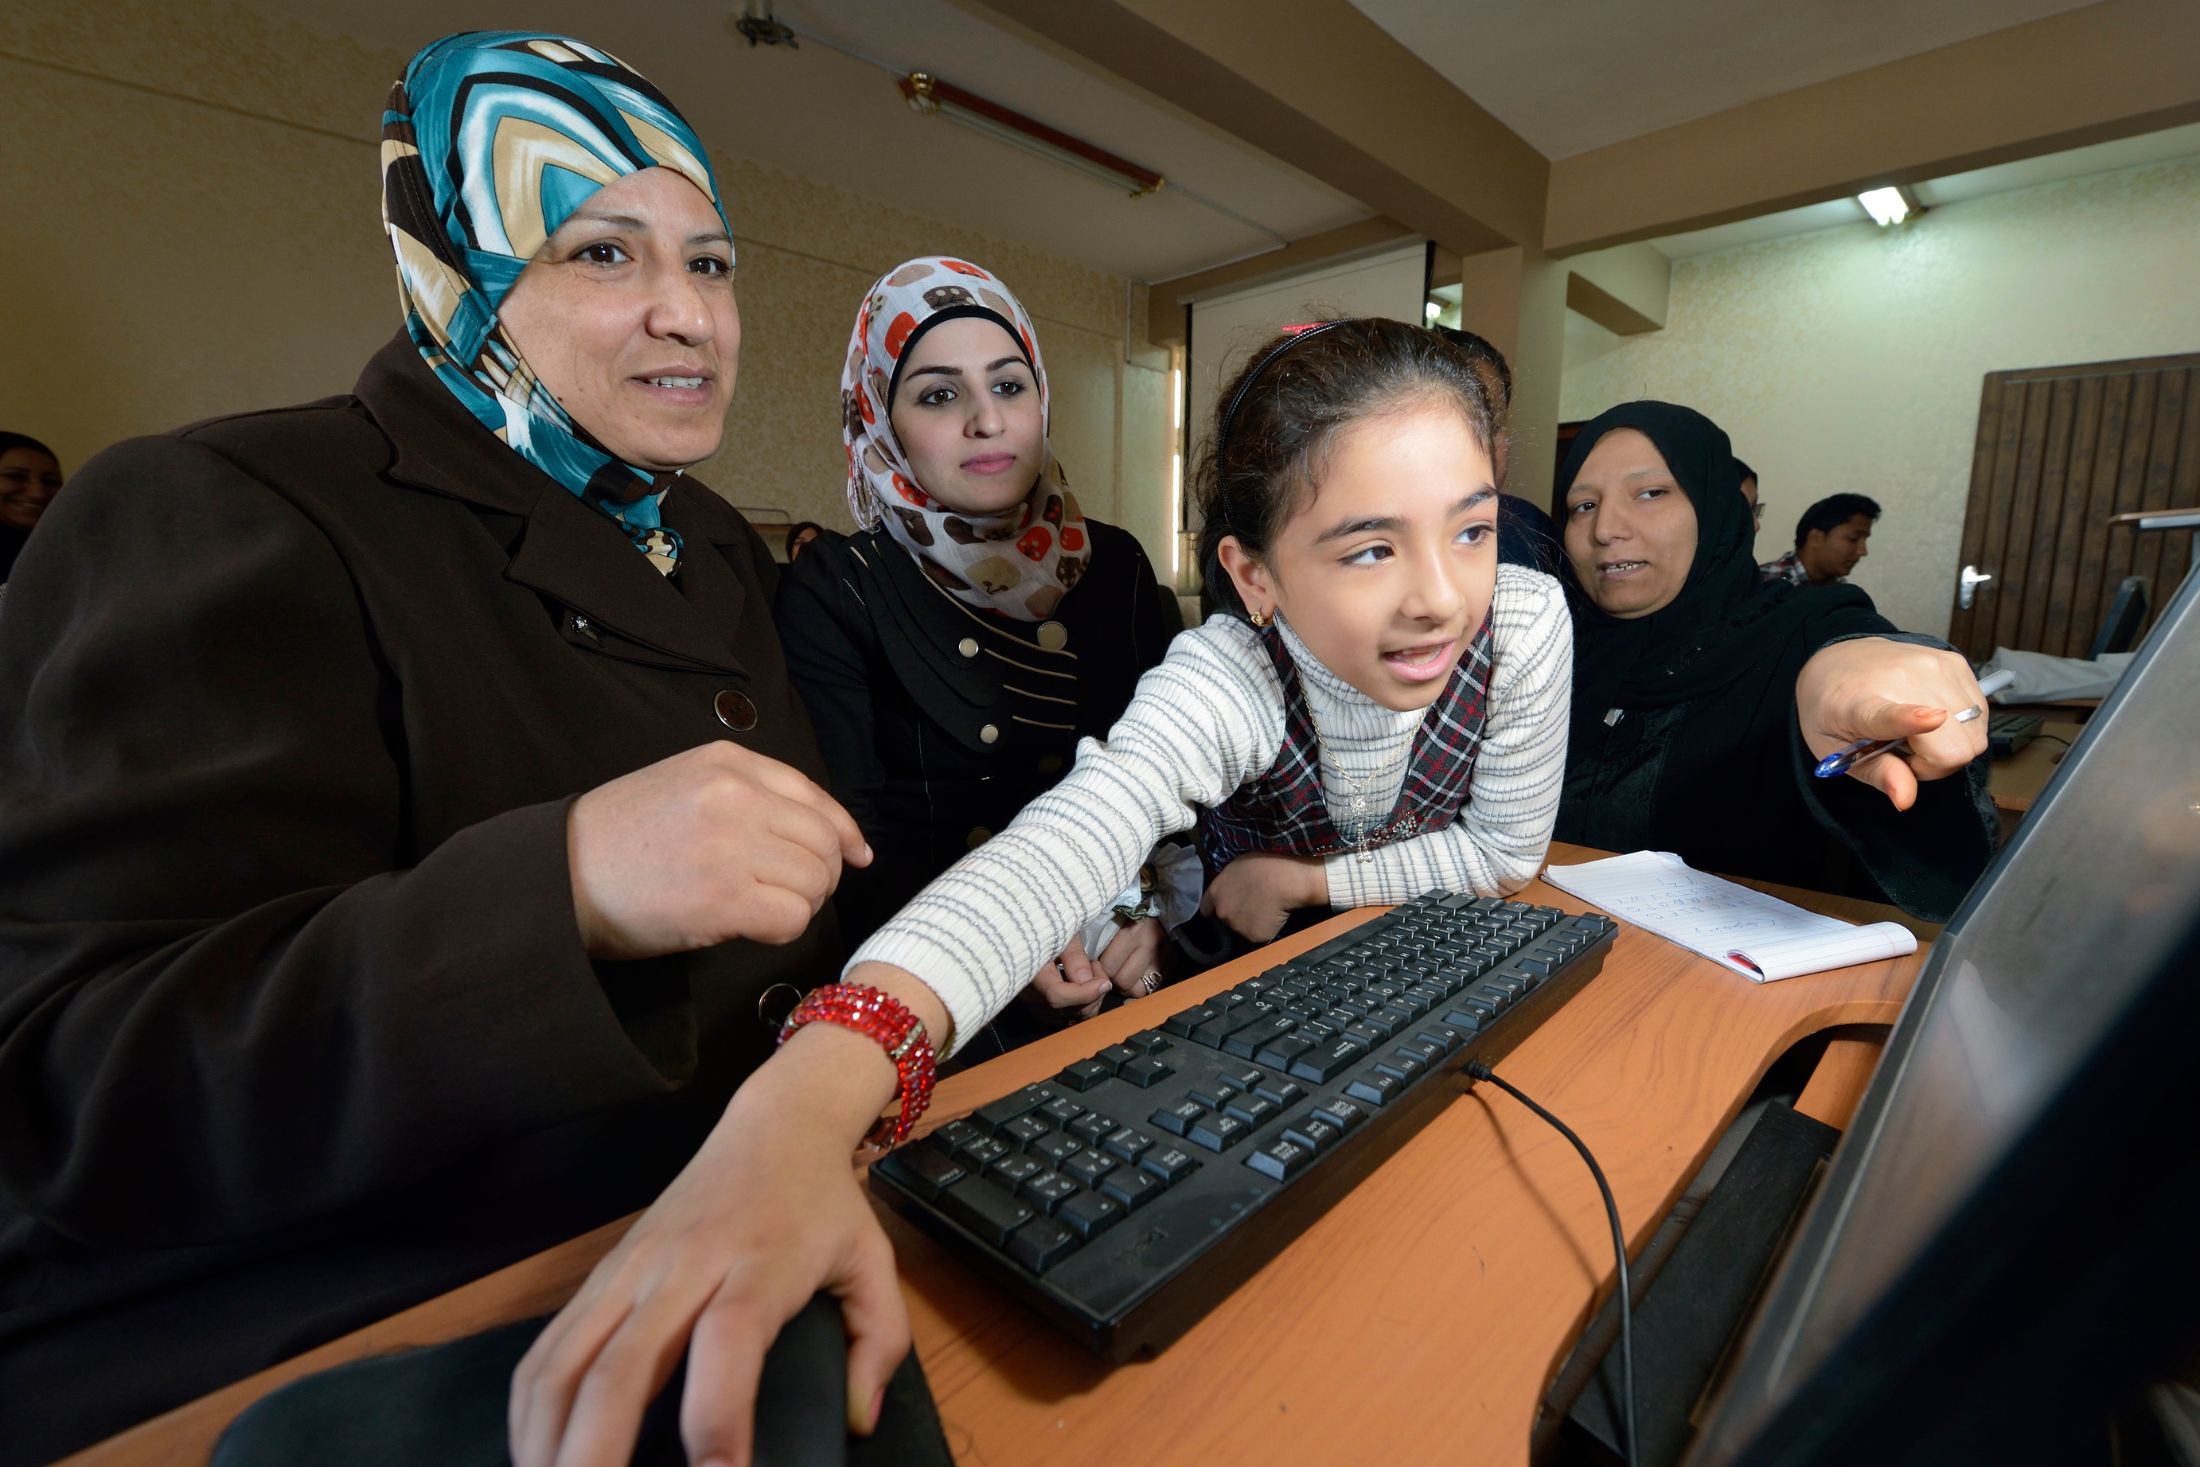 A girl reaches for a computer mouse in front two women in headscarves who are looking intently at a computer screen. A third woman in a headscarf points to something on the screen